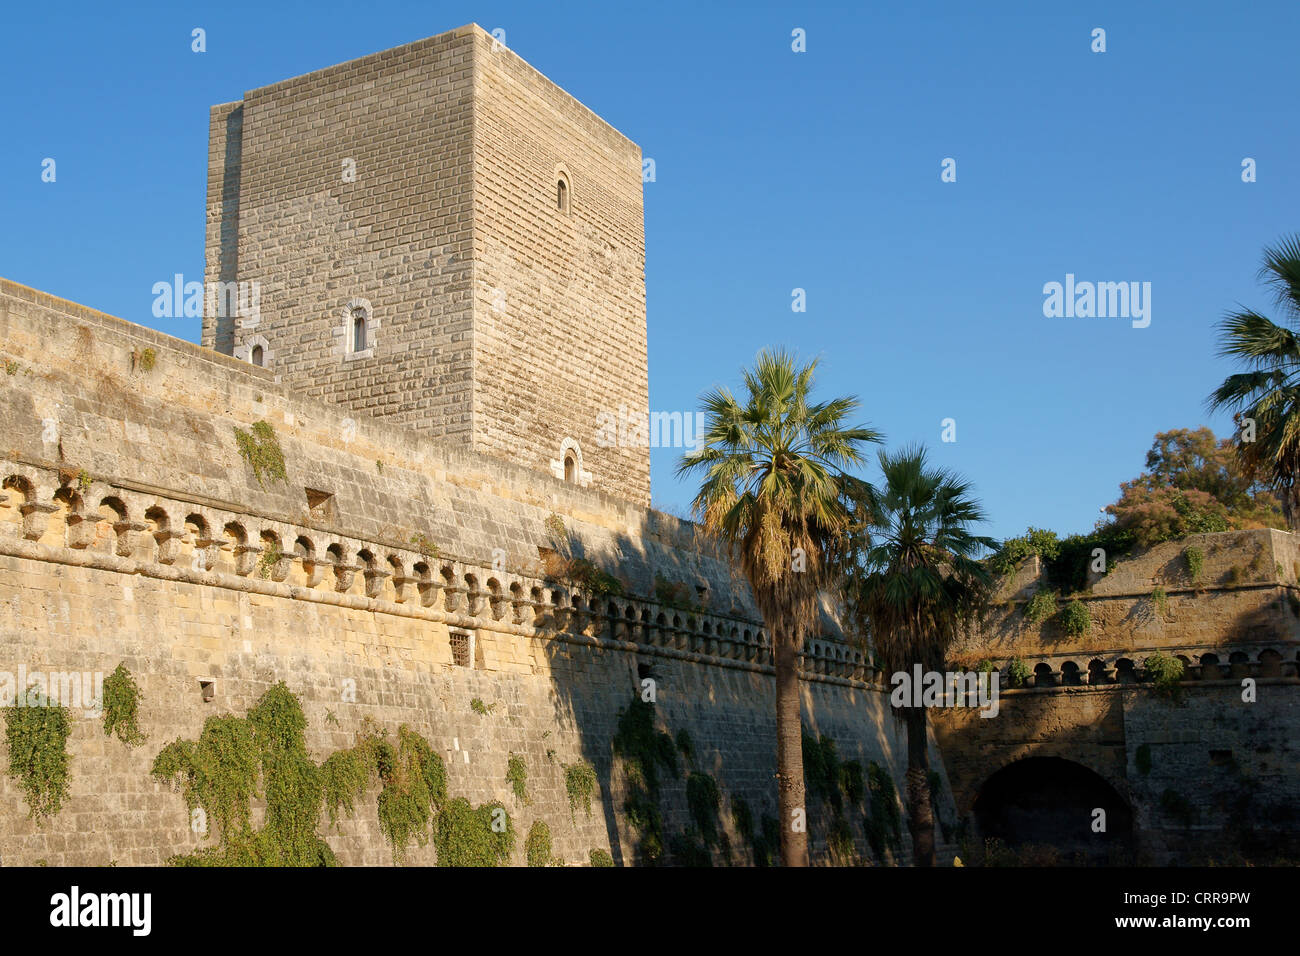 The Norman-Swabian castle of Bari was built by the Normans in the XII century and restored by Frederick II of Swabia. Stock Photo